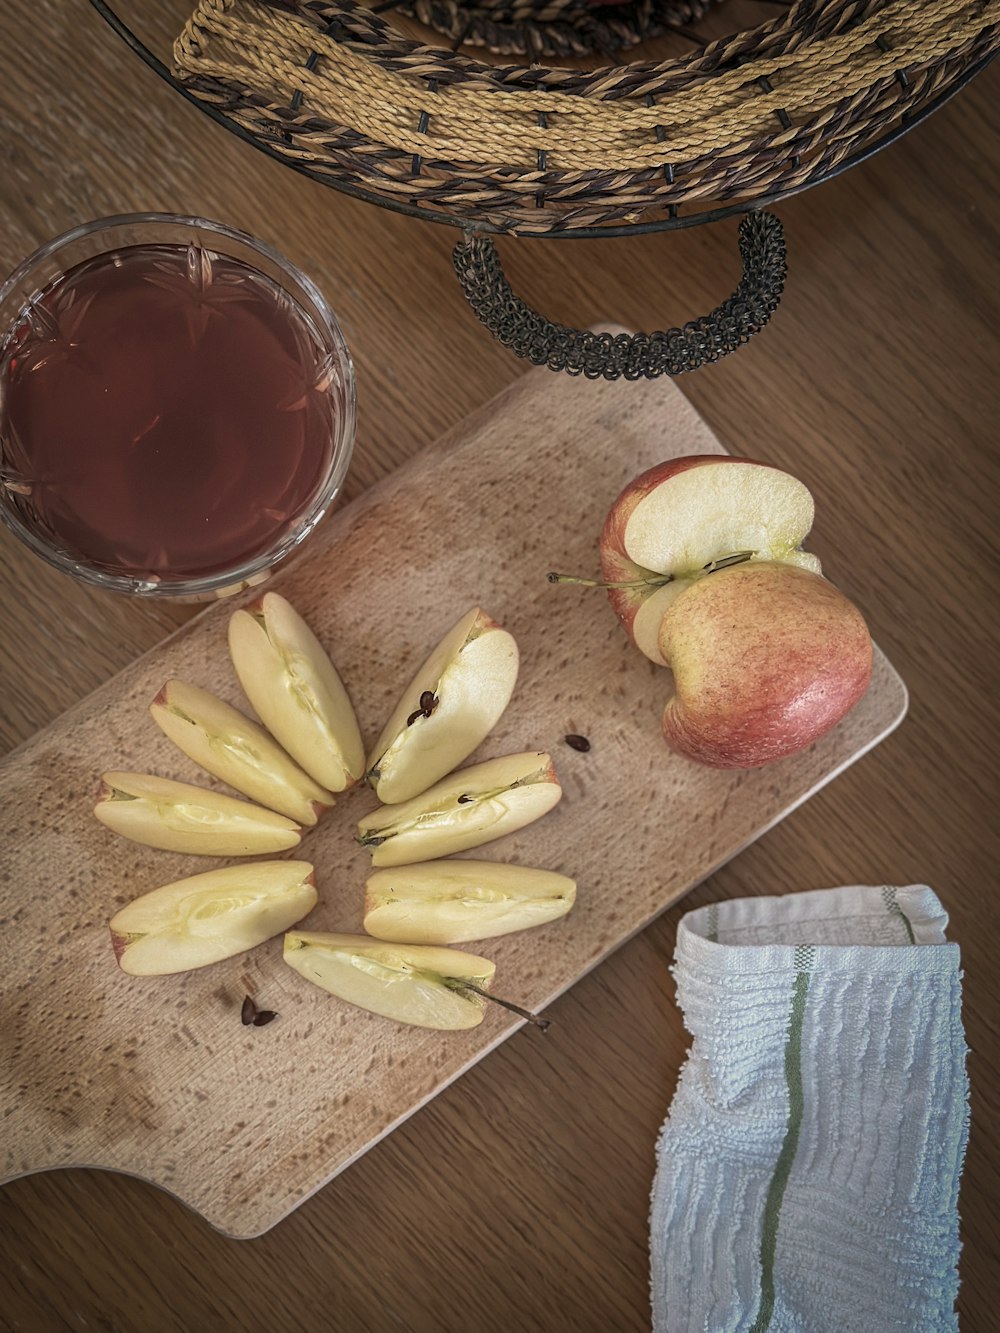 a wooden cutting board topped with sliced apples